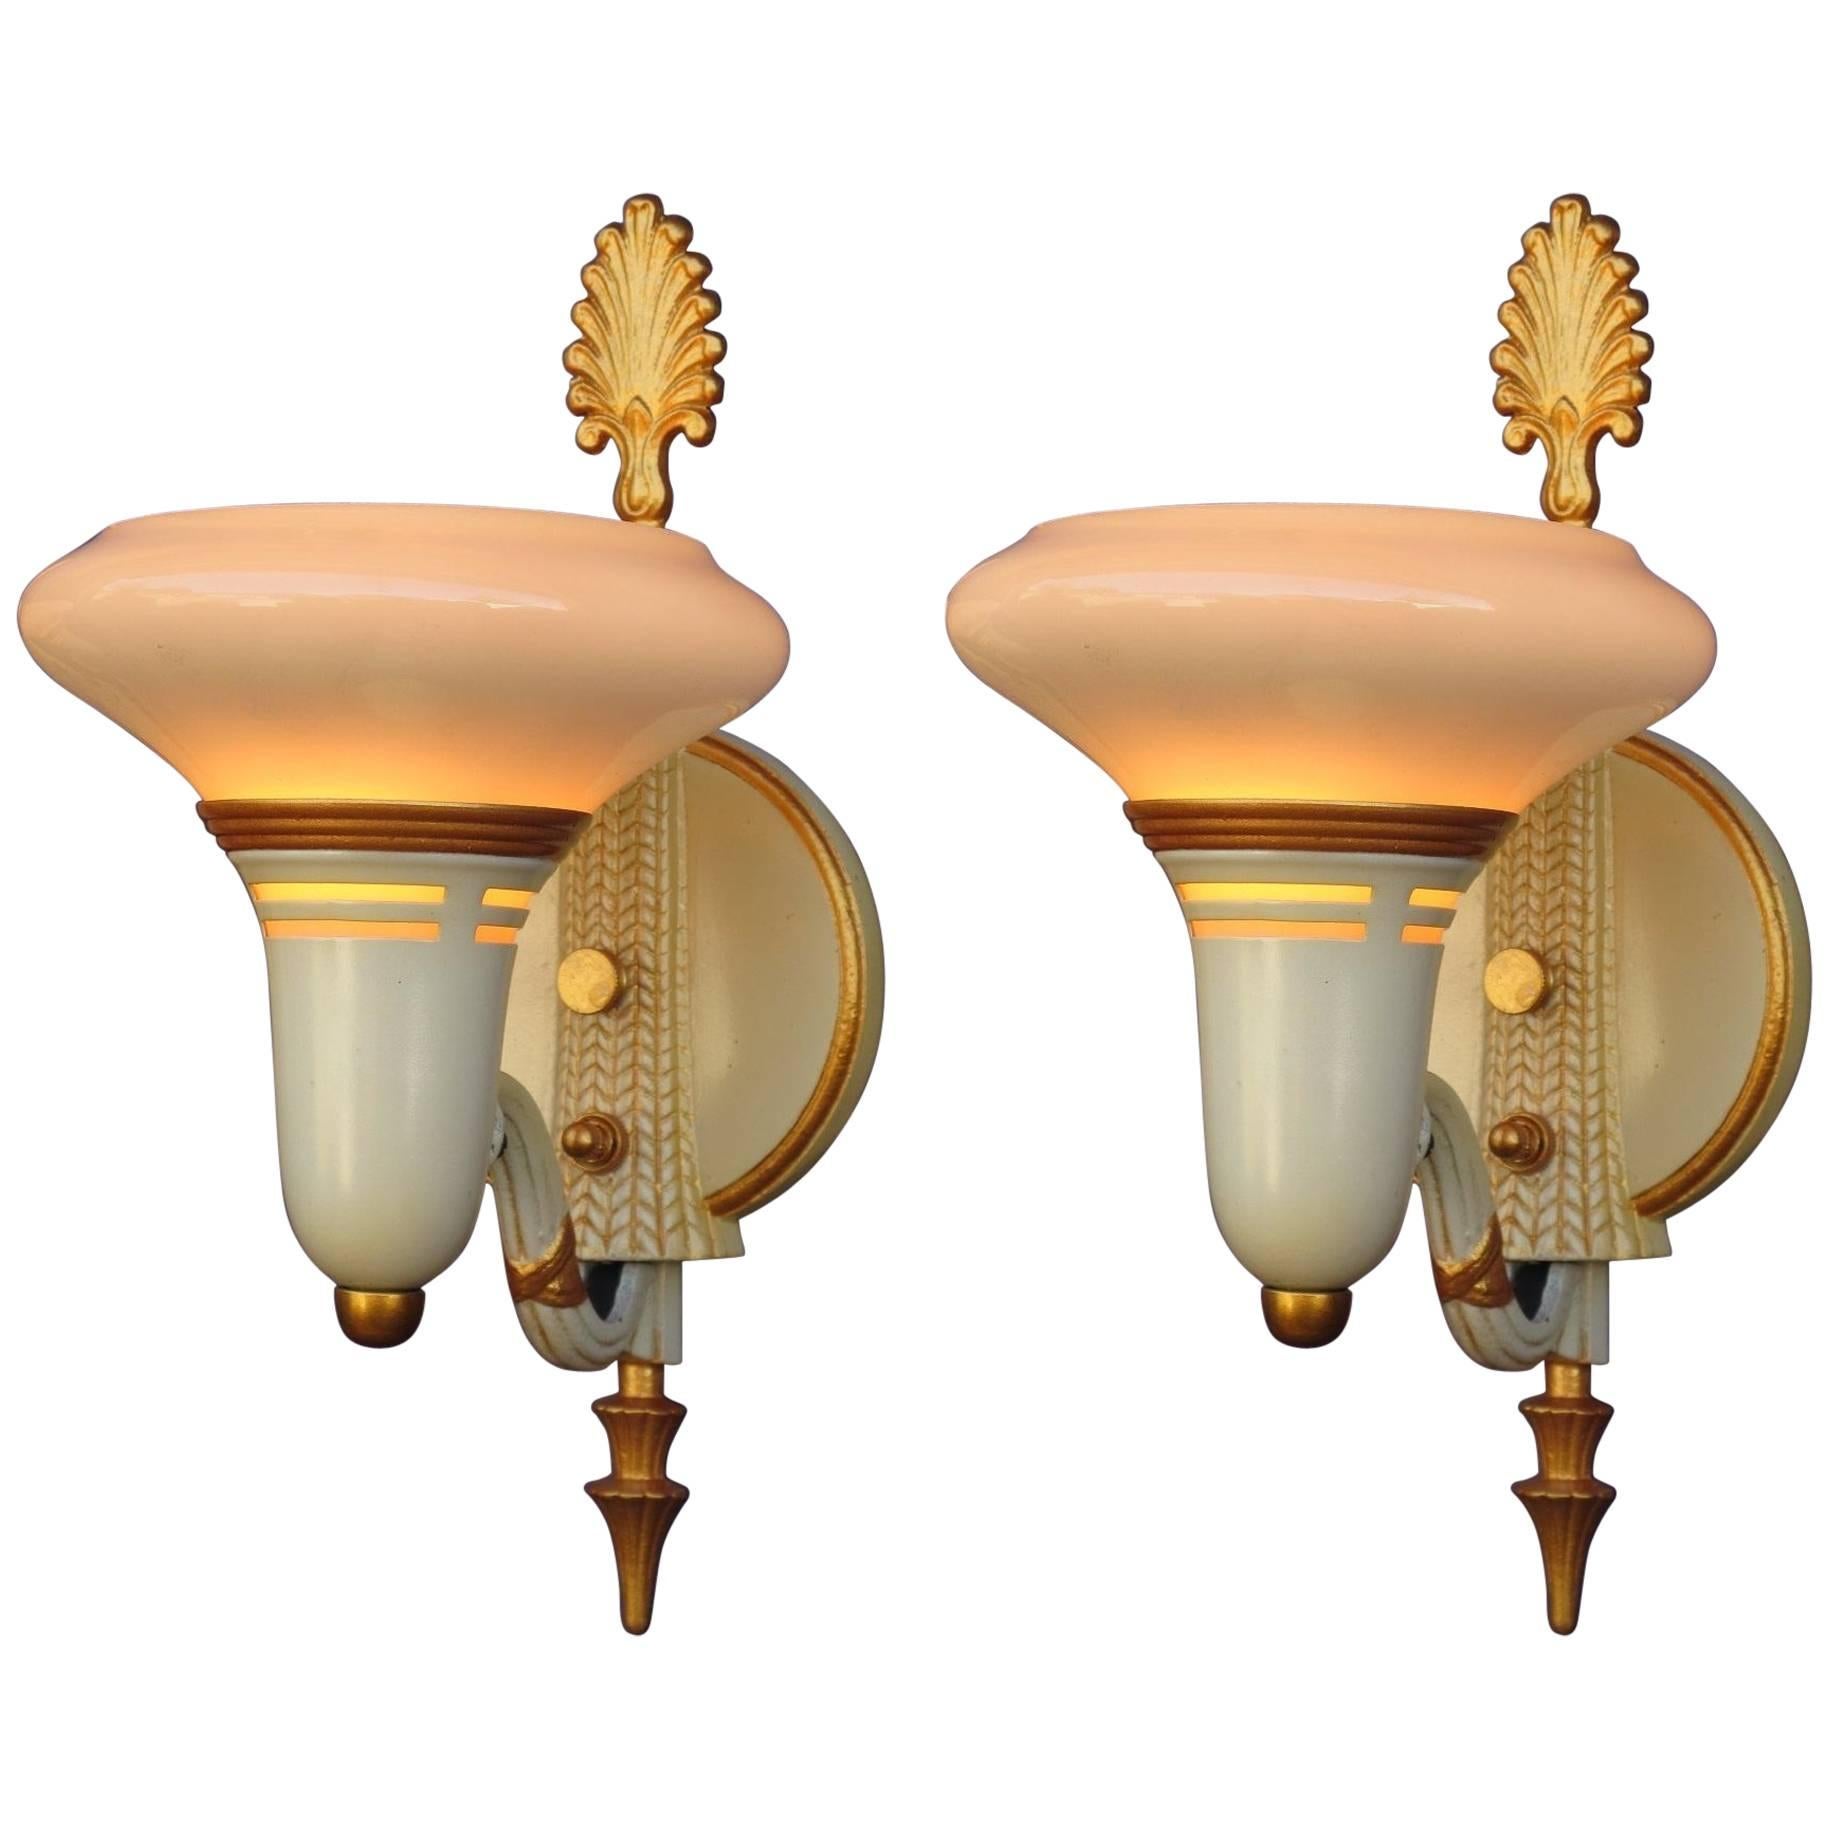 Late 1920s-Early 1930s Lightolier Deco Sconces